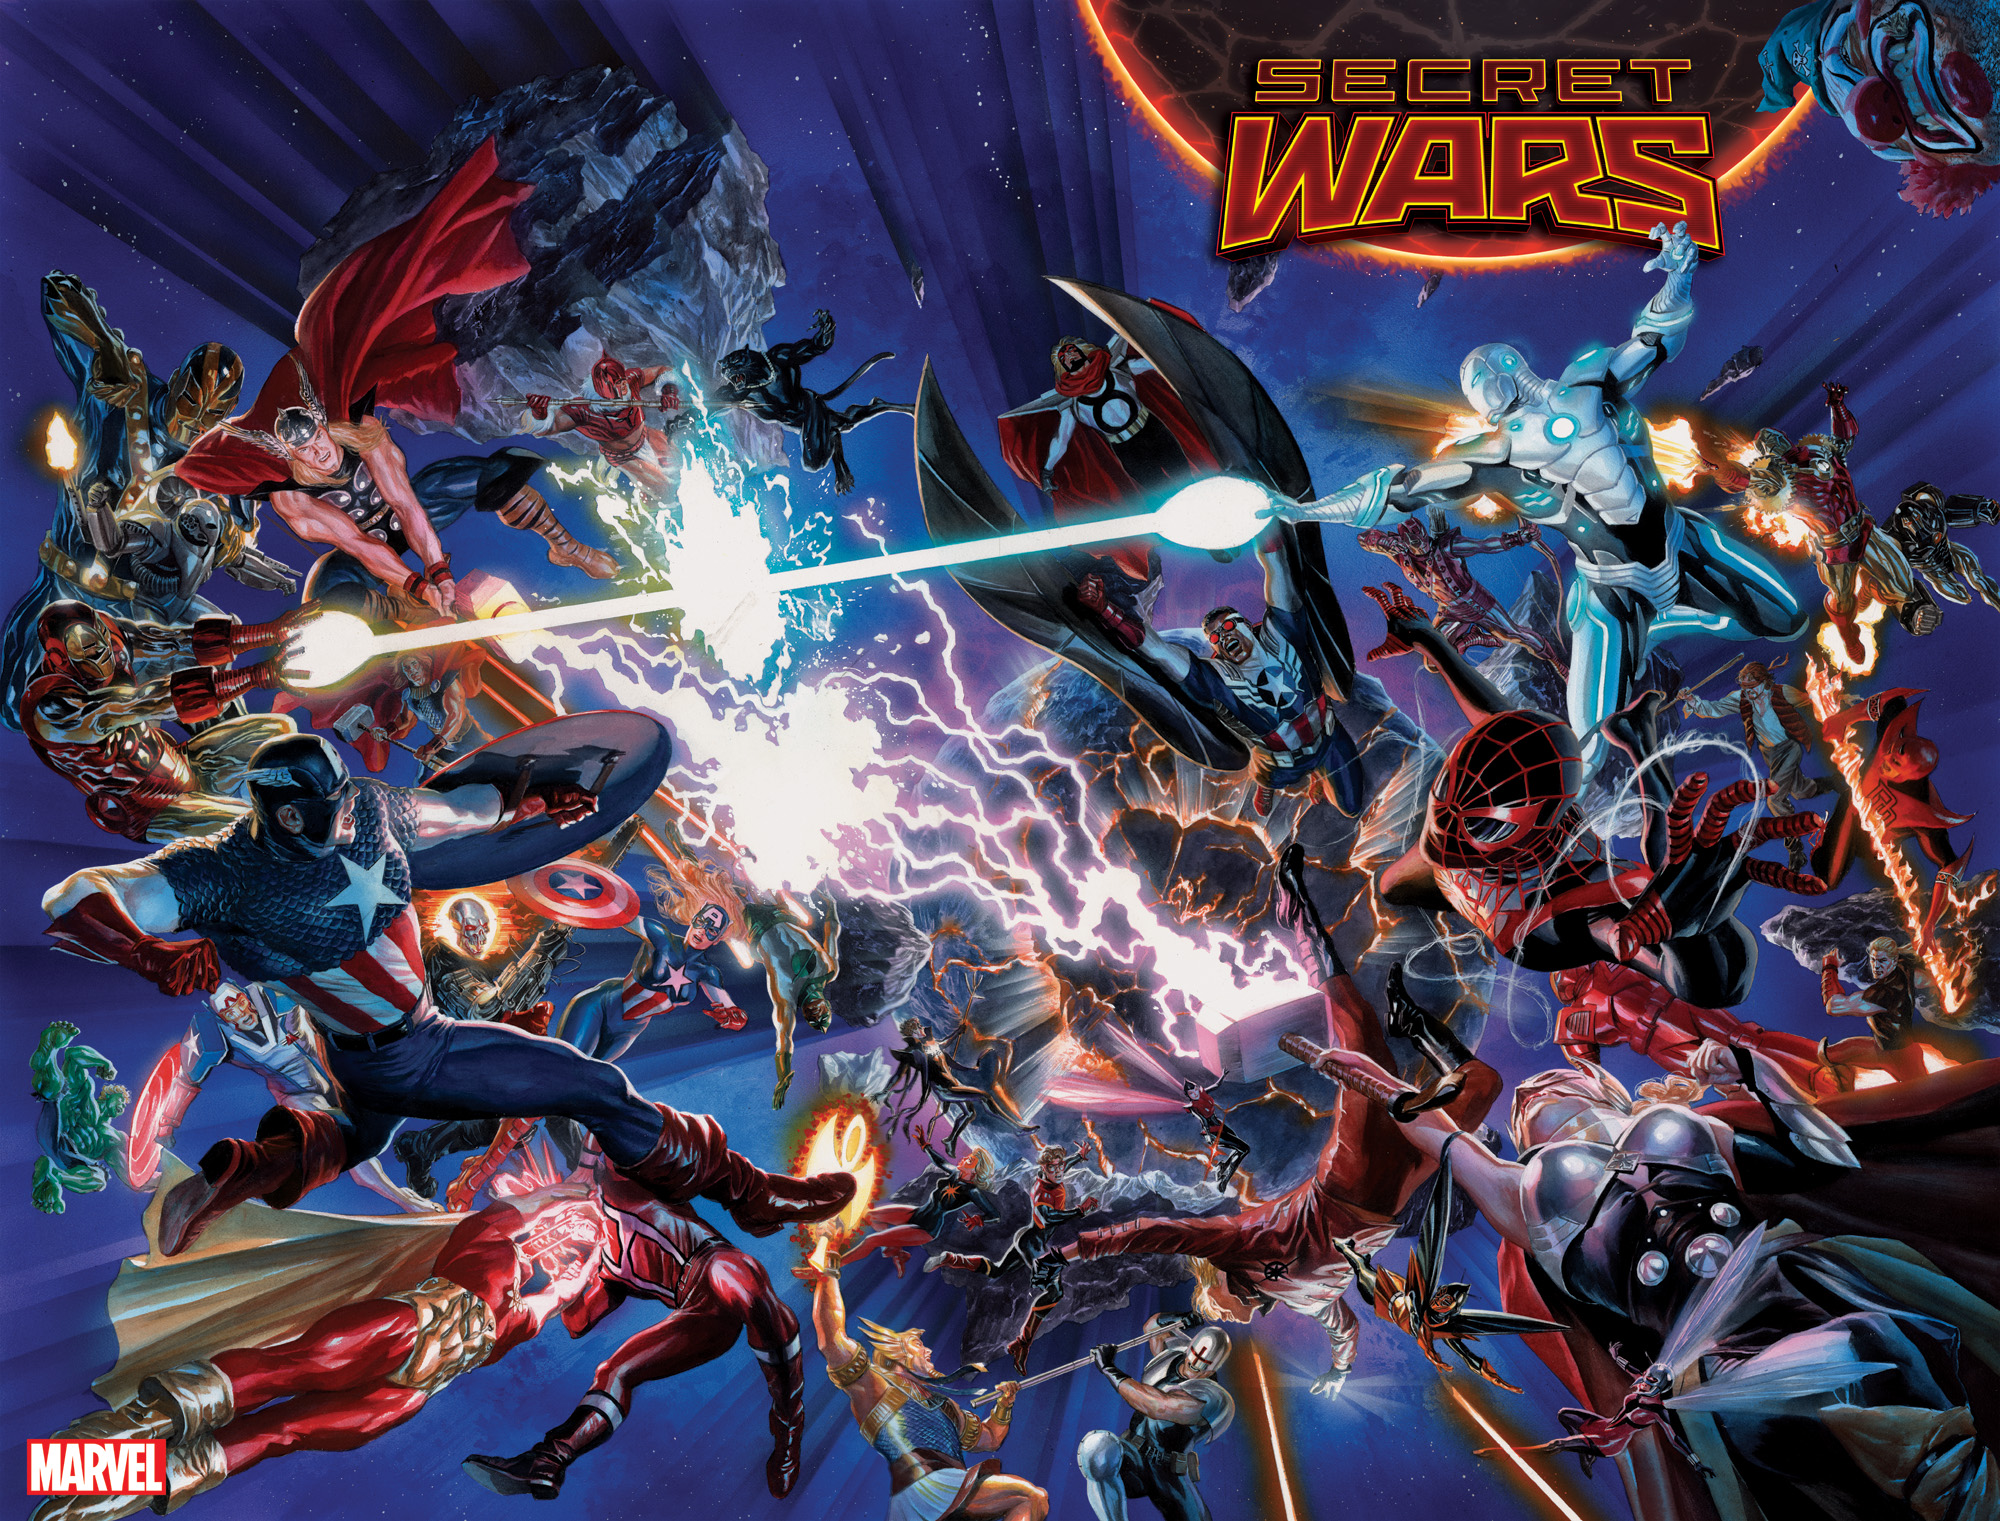 The Pull List: Secret Wars #1 Is Almost Too Big in Scope